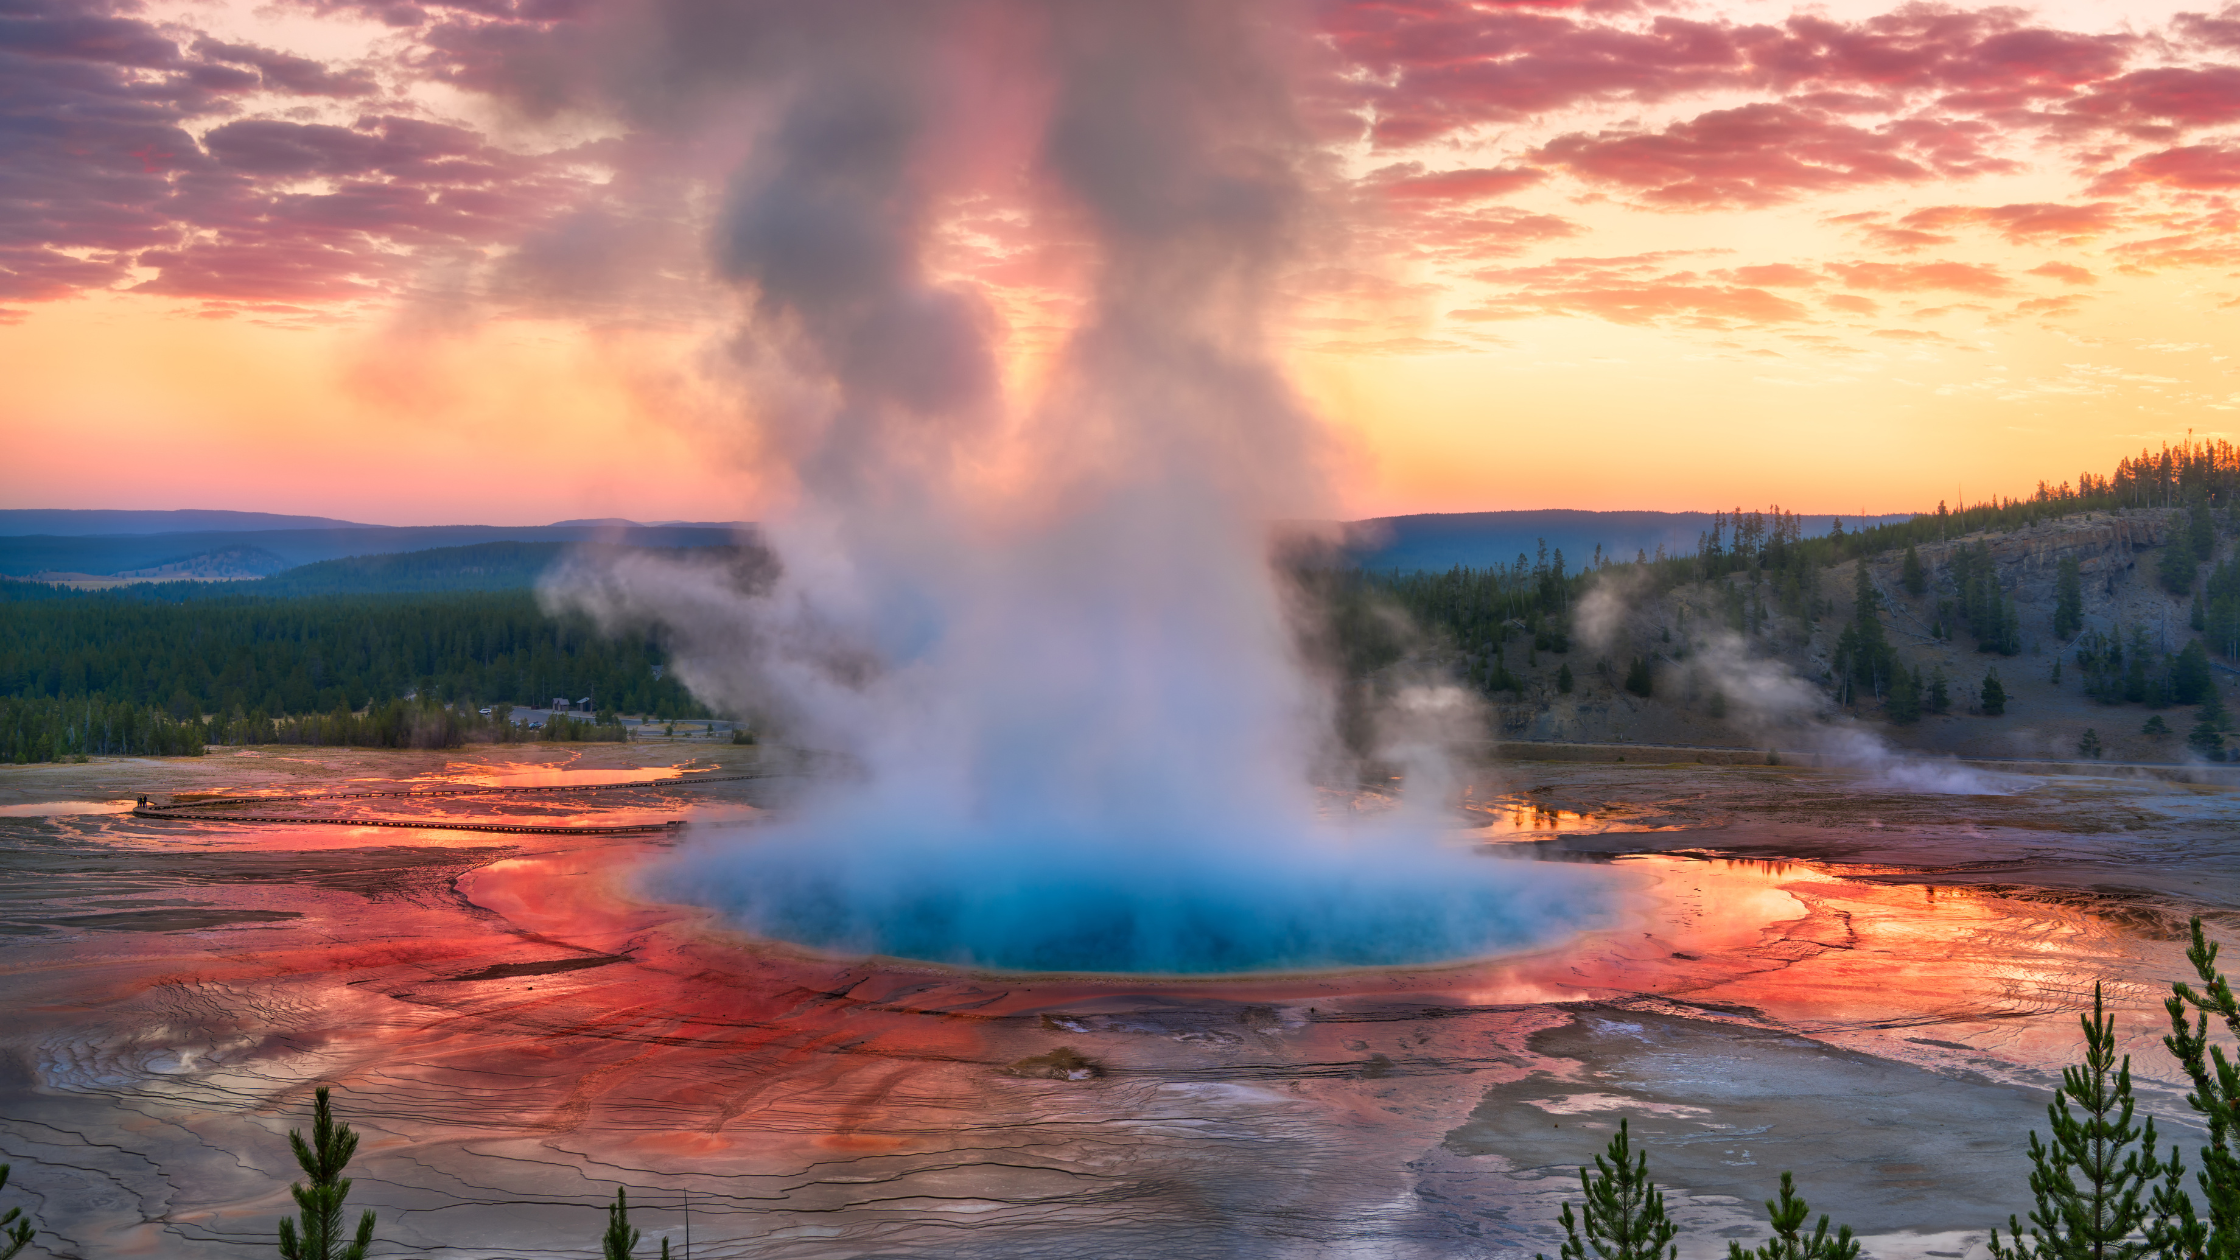 Missing Yellowstone? Here are Some Hosts who Capture that Experience